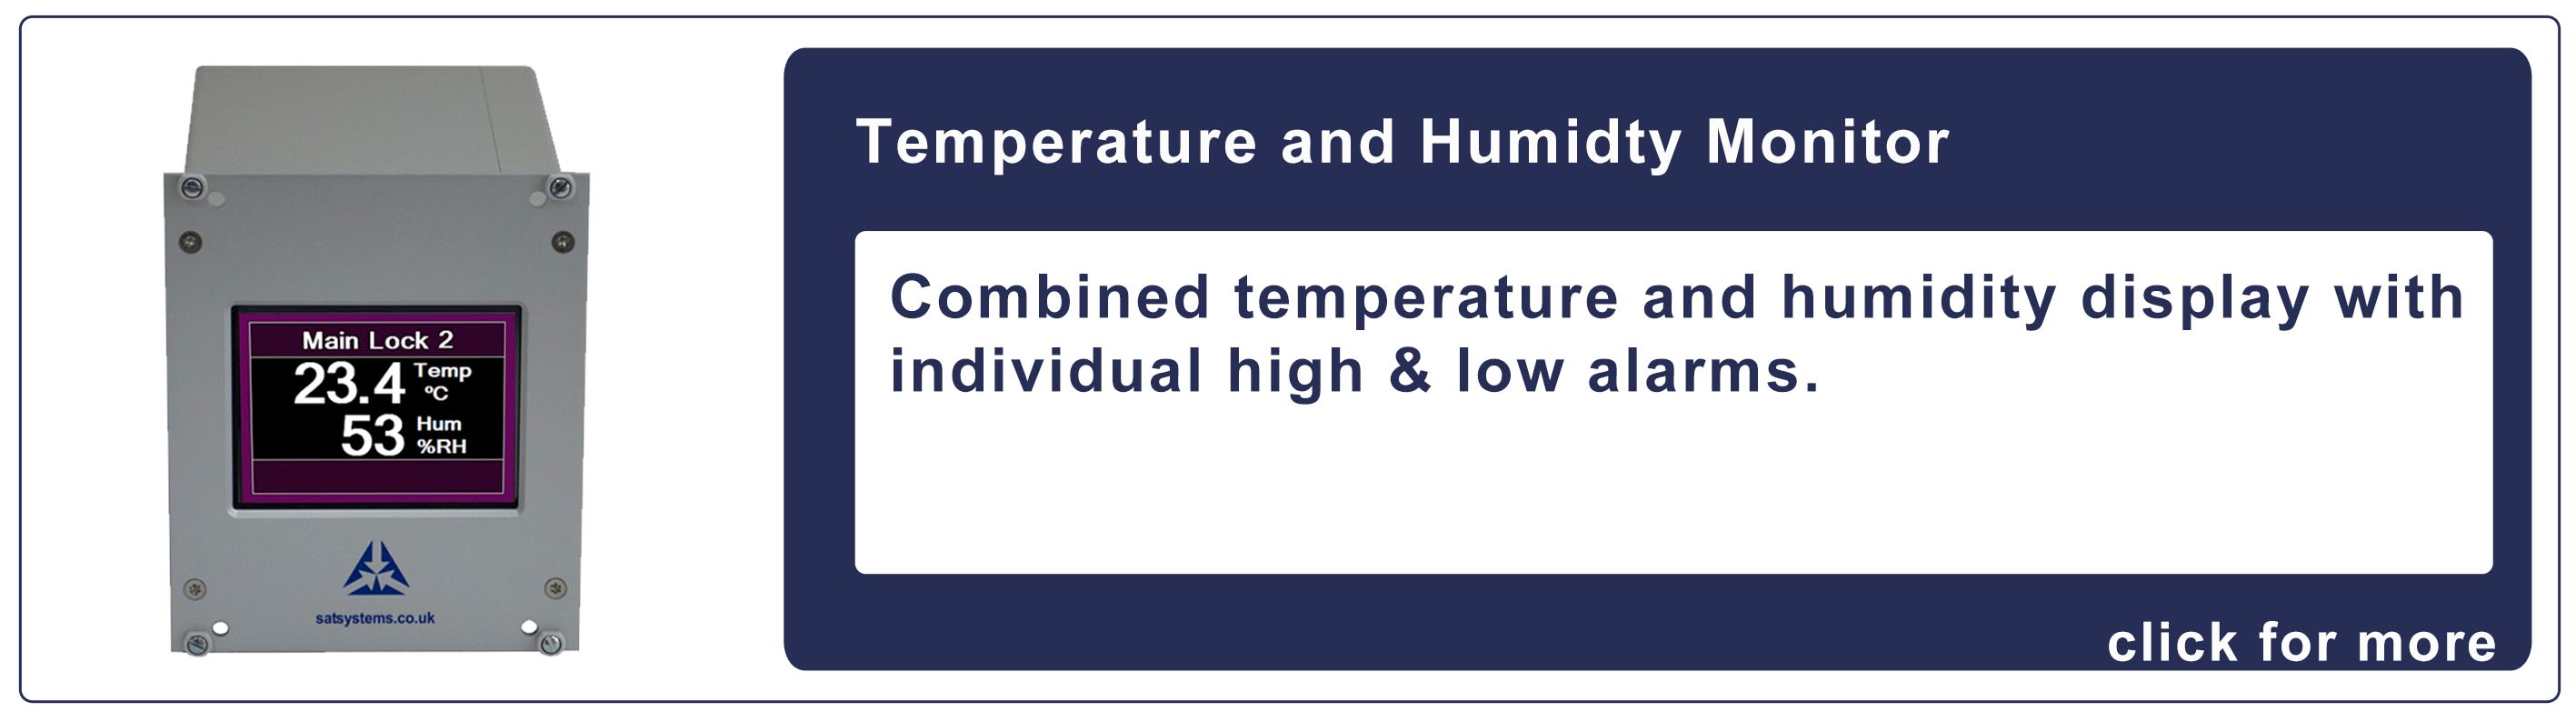 Temperature-and-Humdity-Monitor